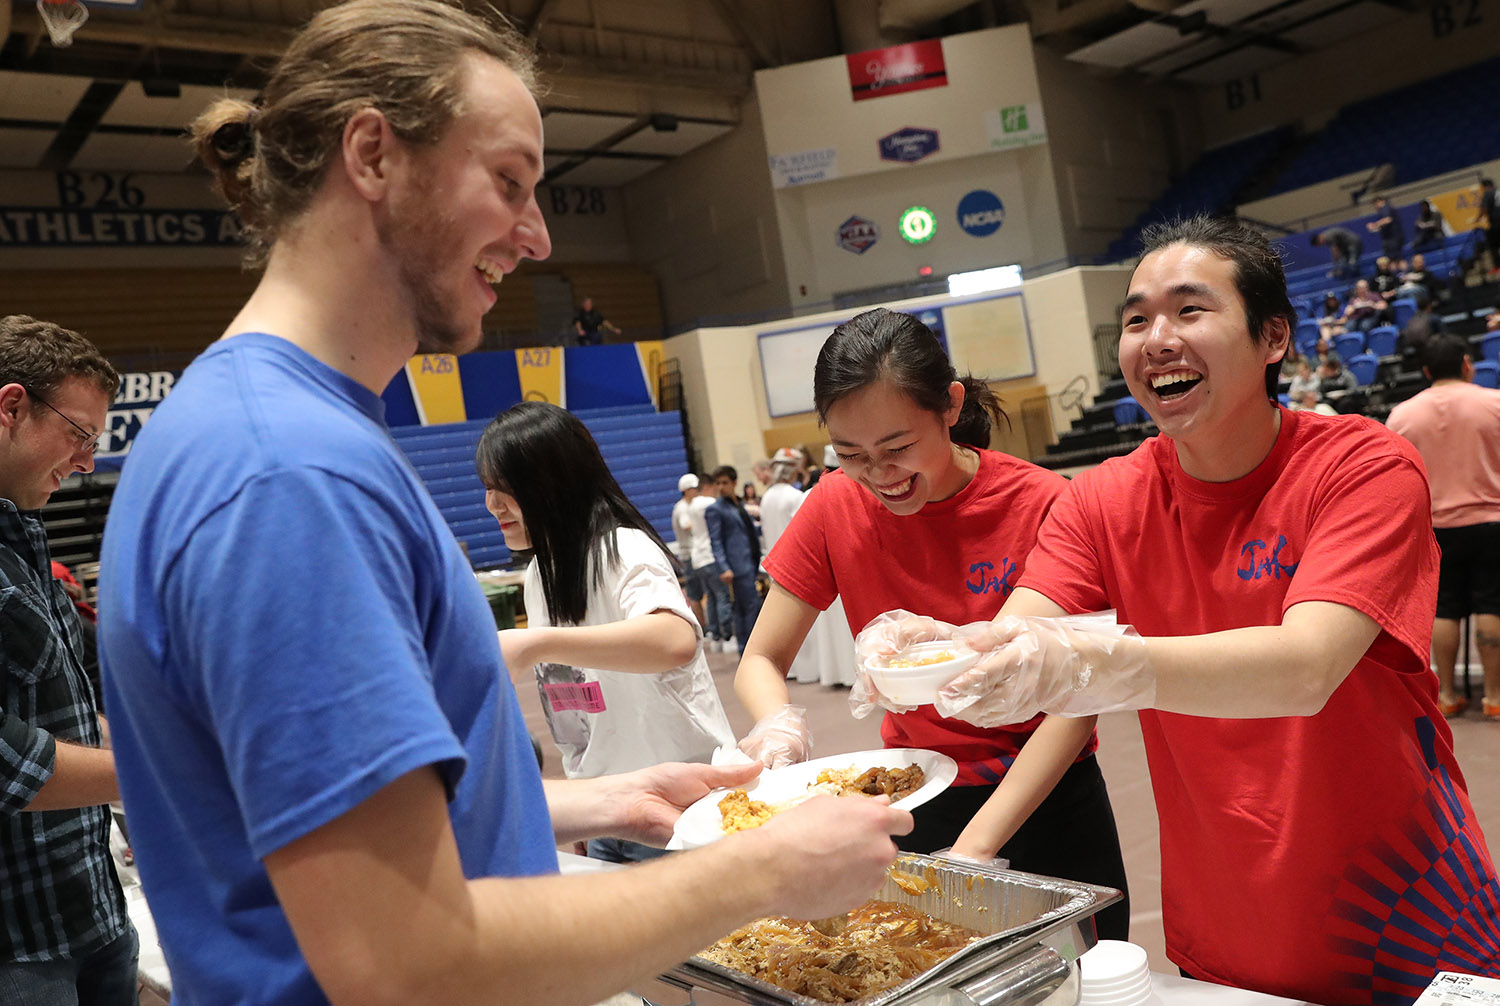 Explore the world at UNK’s International Food and Cultural Festival